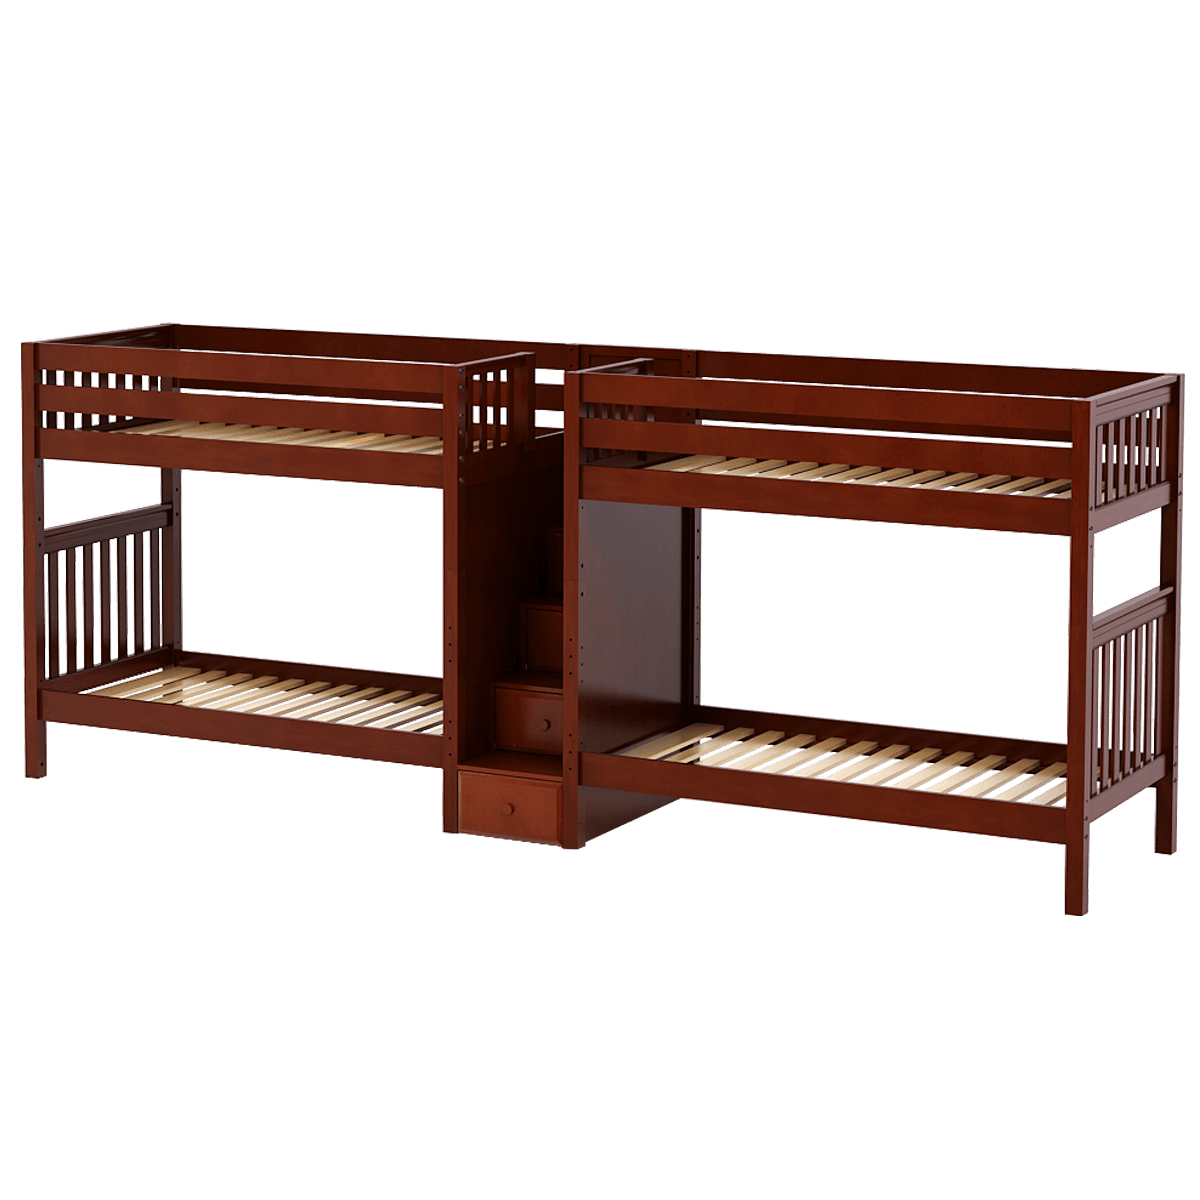 Maxtrix Twin High Quadruple Bunk Bed with Stairs